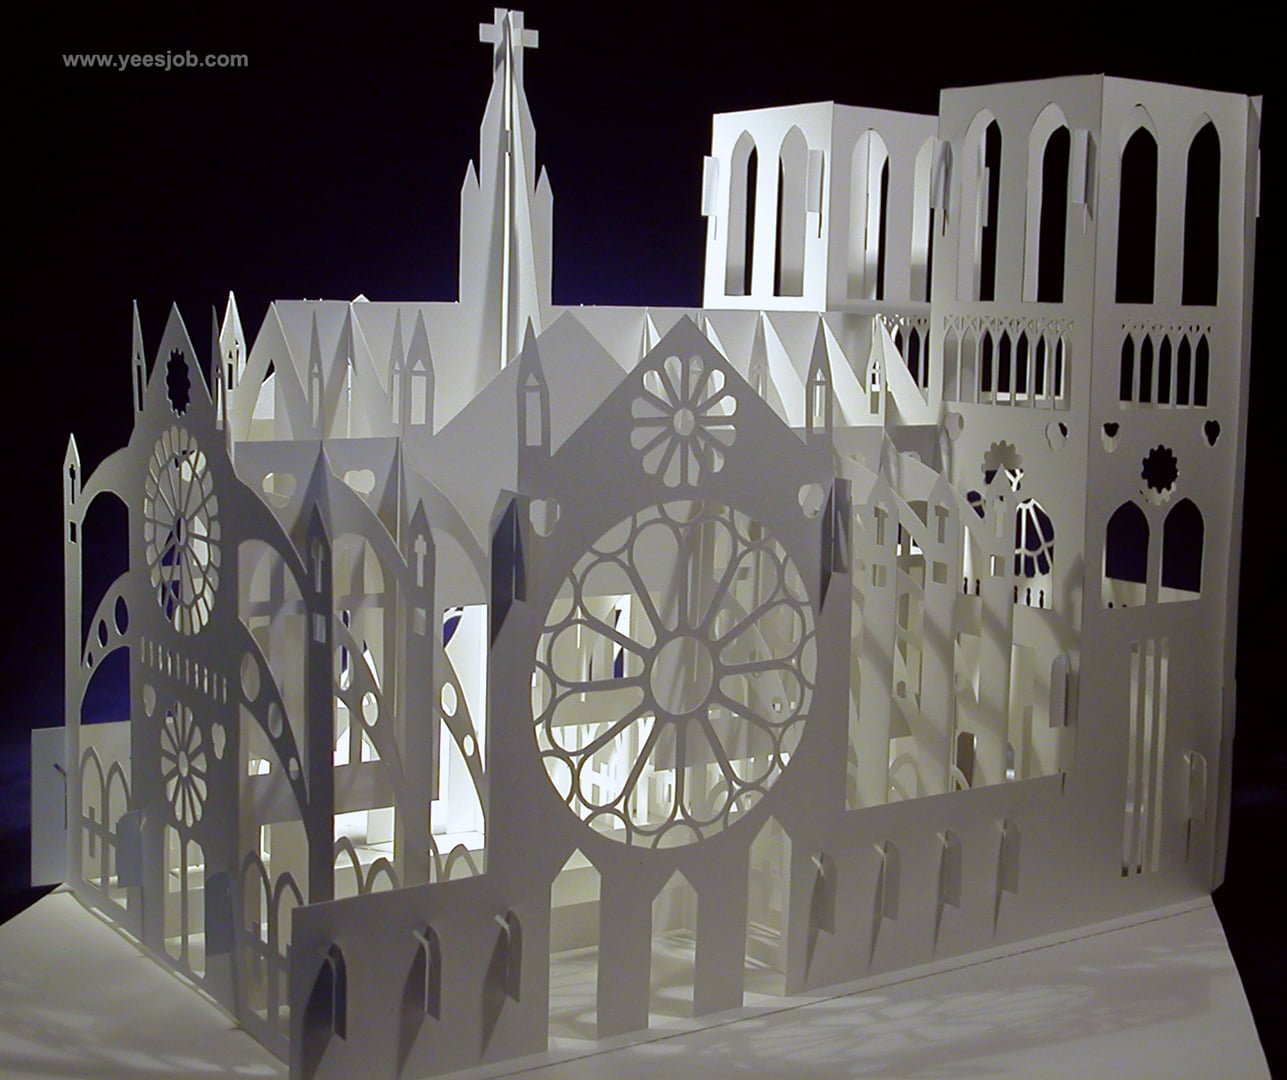 Notre Dame Cathedral -180-Degrees-Open Pop up DIY Kirigami Architecture